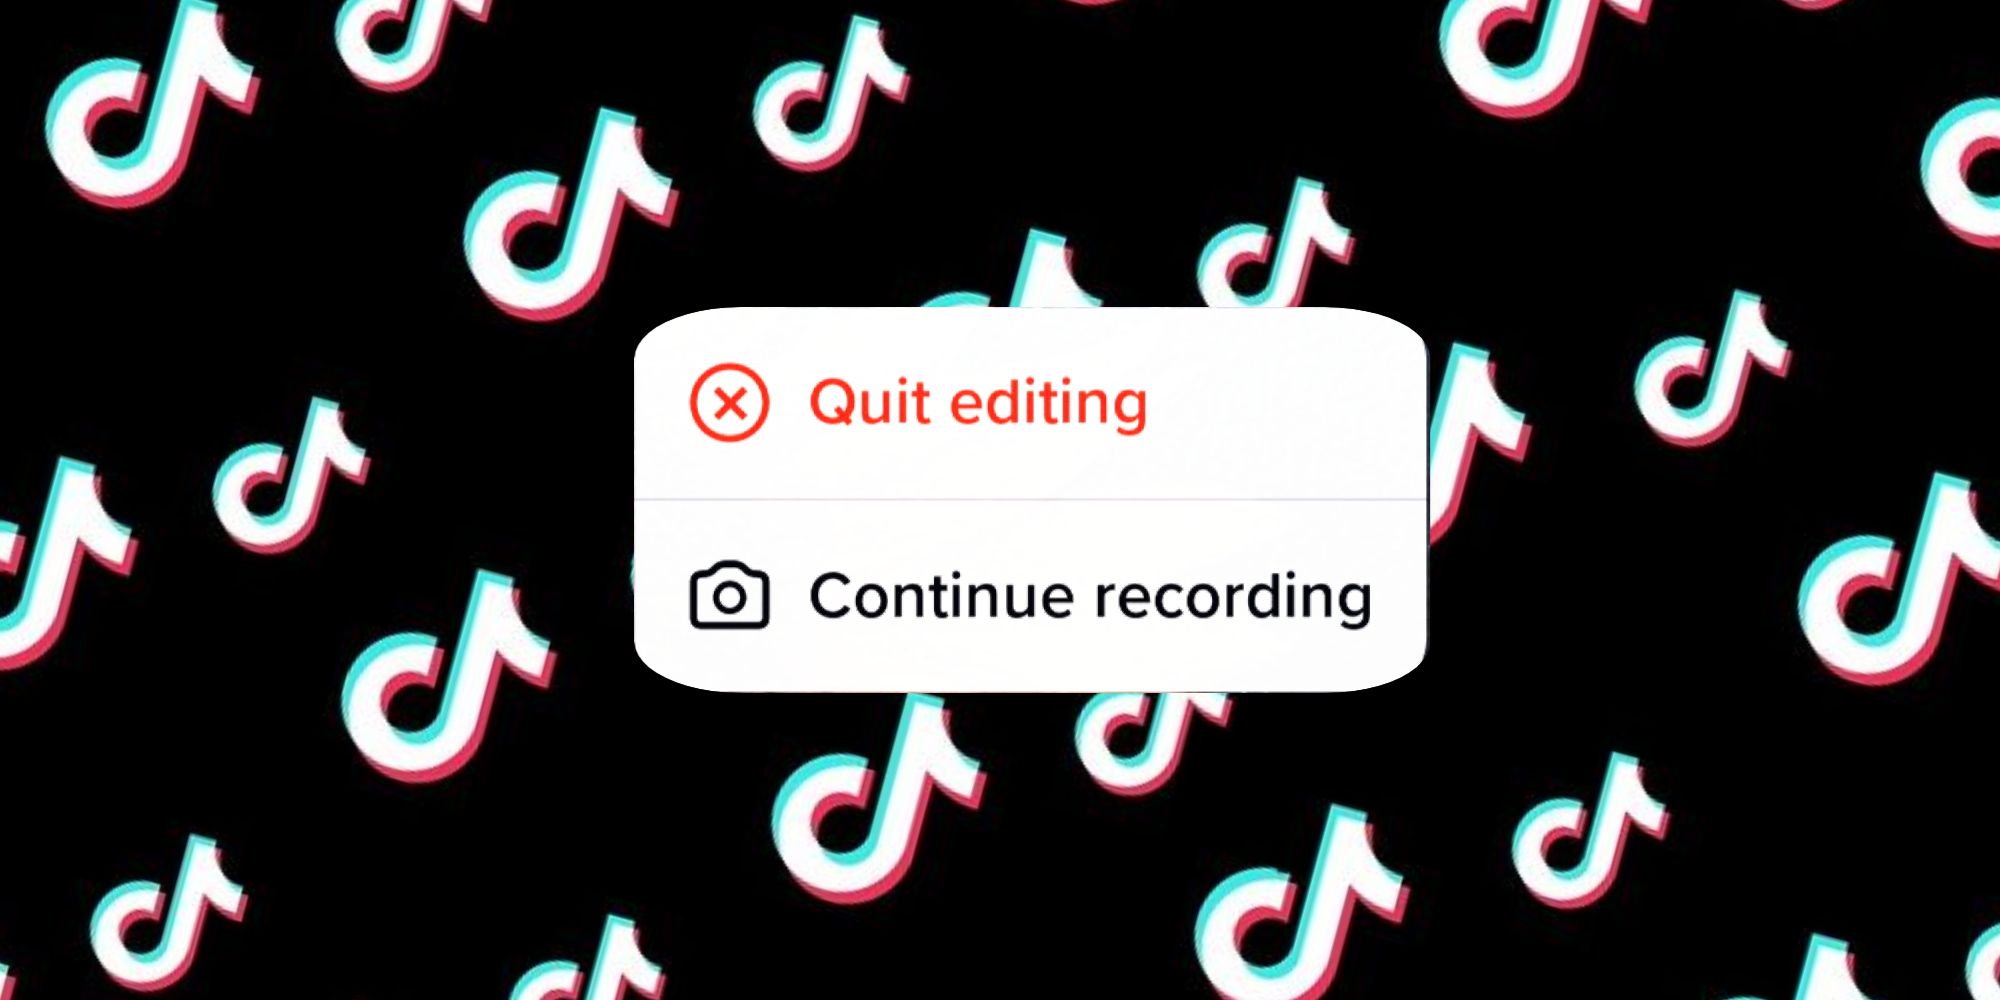 a message box that says "quit editing" and "continue recording" in front of a background with a repeating TikTok logo 